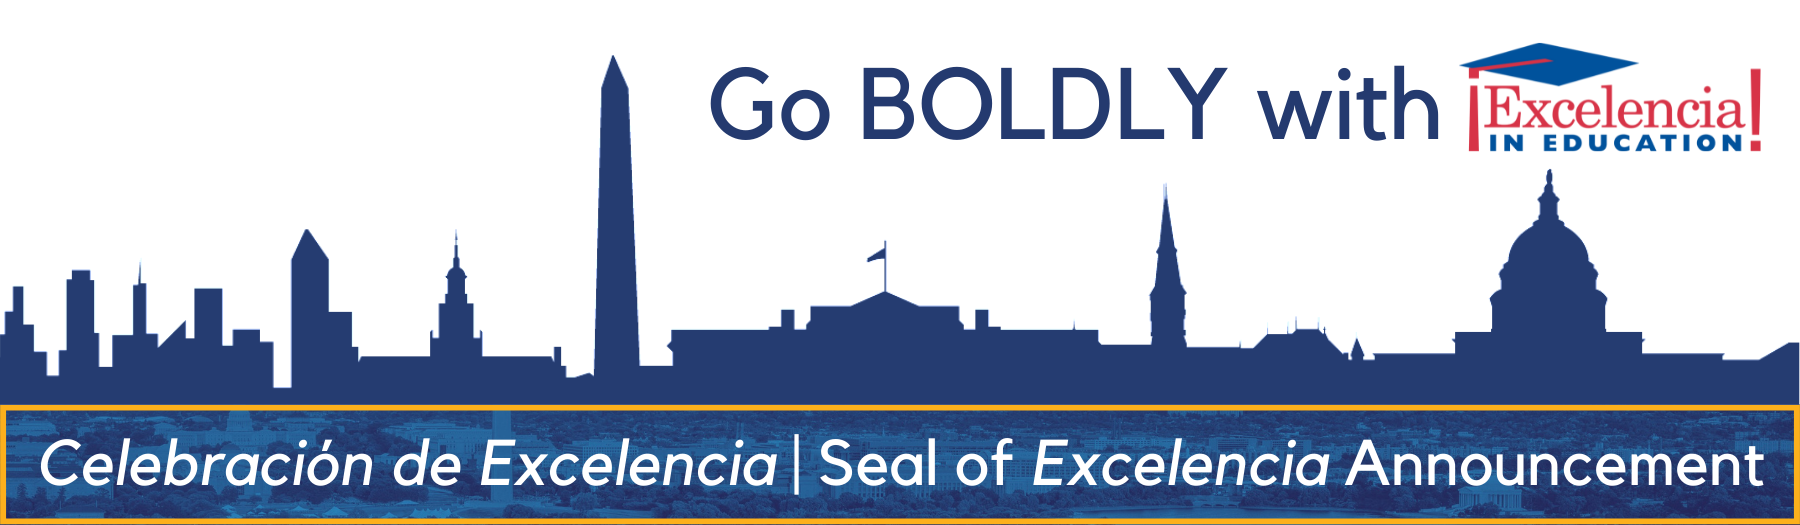 Fall Events 2022 "Go Boldly with Excelencia in Education" website header